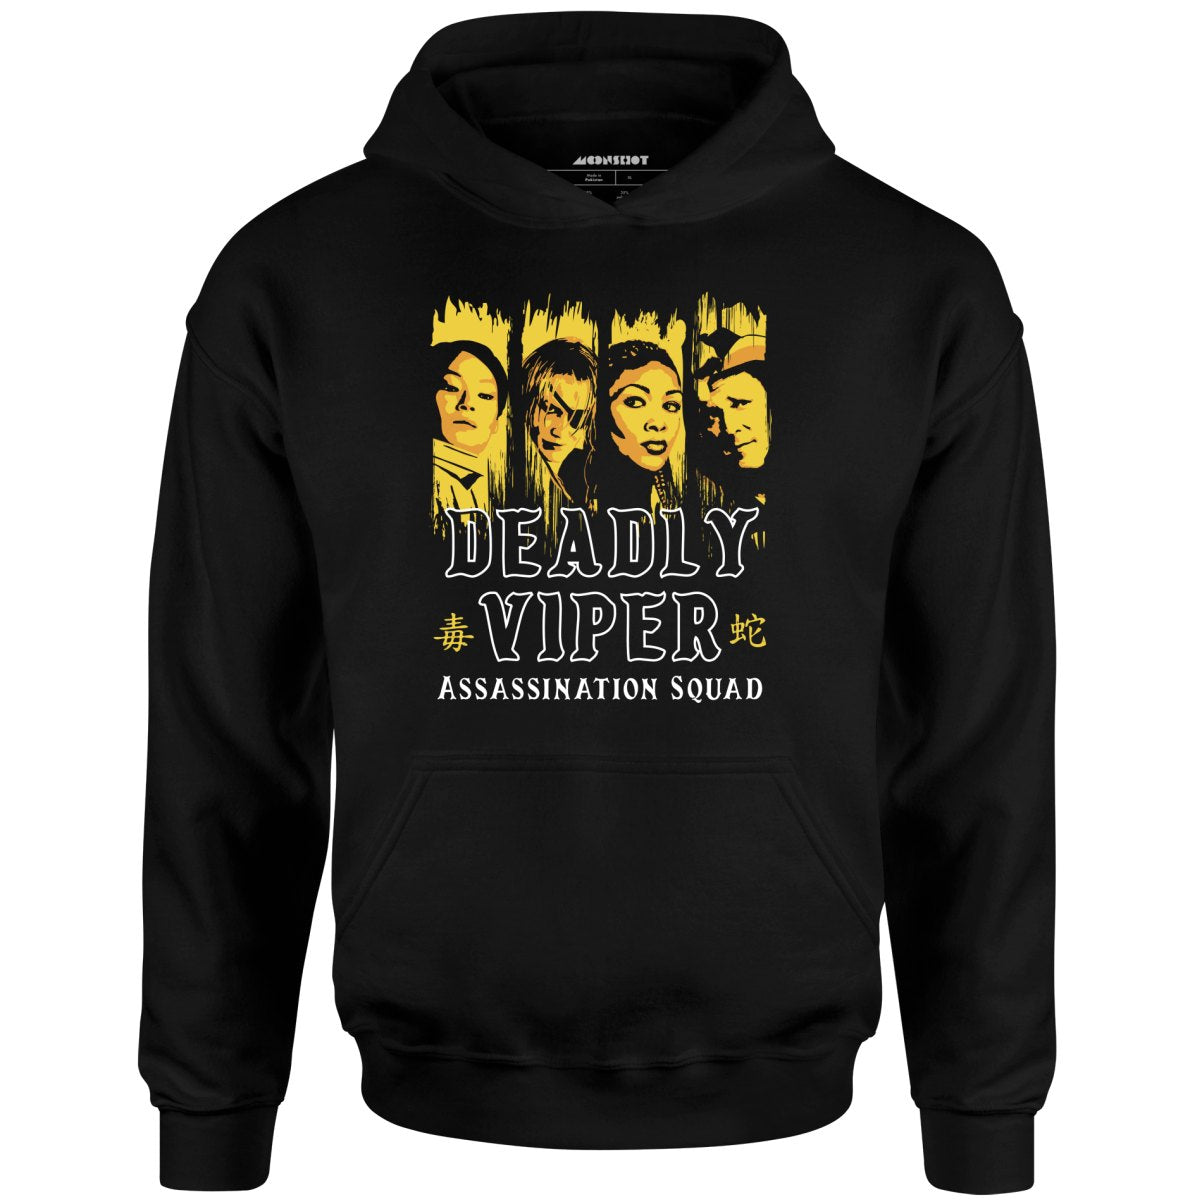 Deadly Viper Assassination Squad - Unisex Hoodie